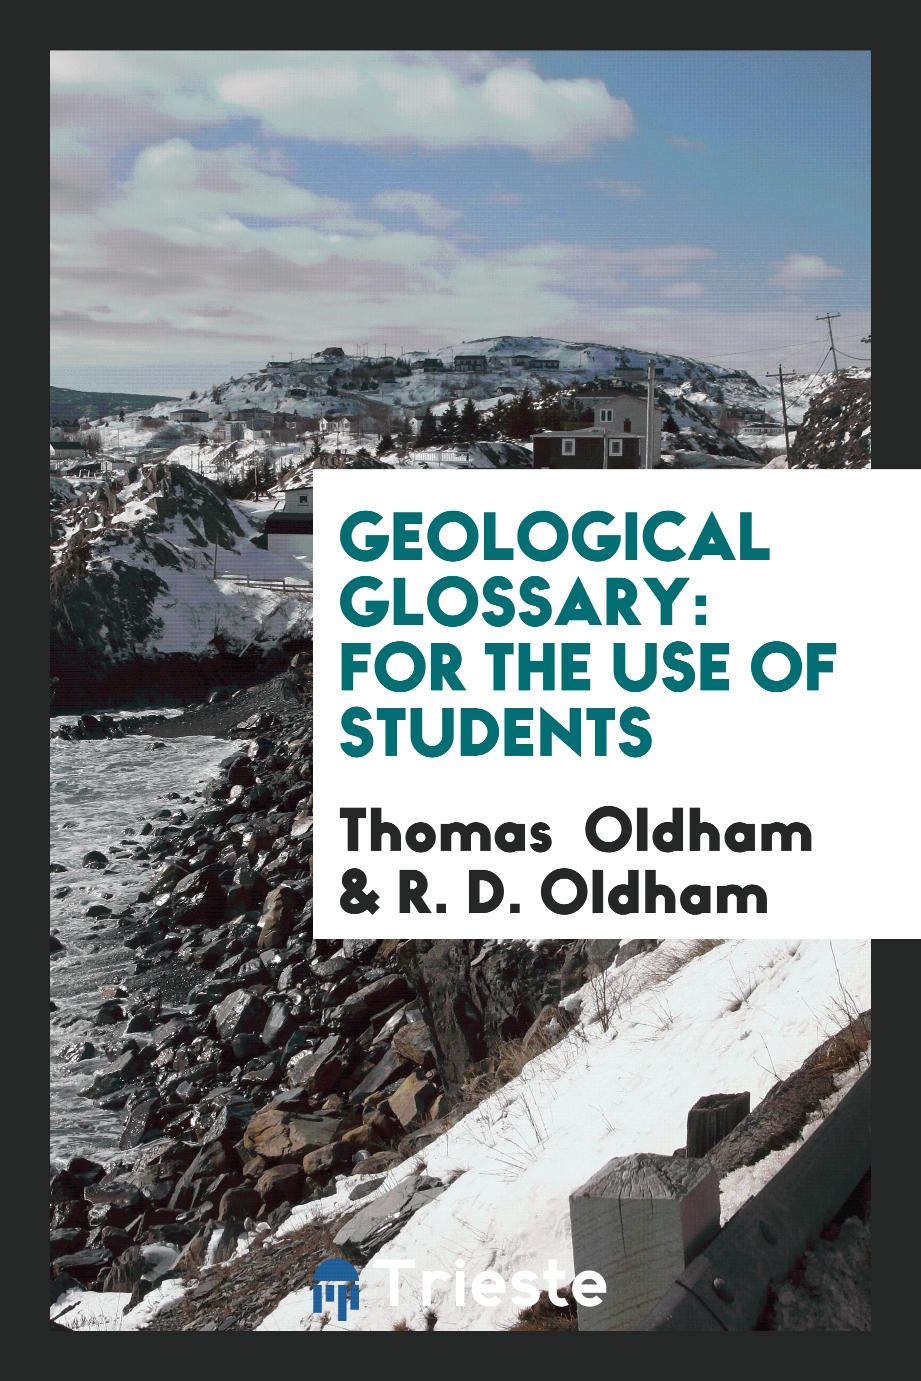 Geological Glossary: For the Use of Students